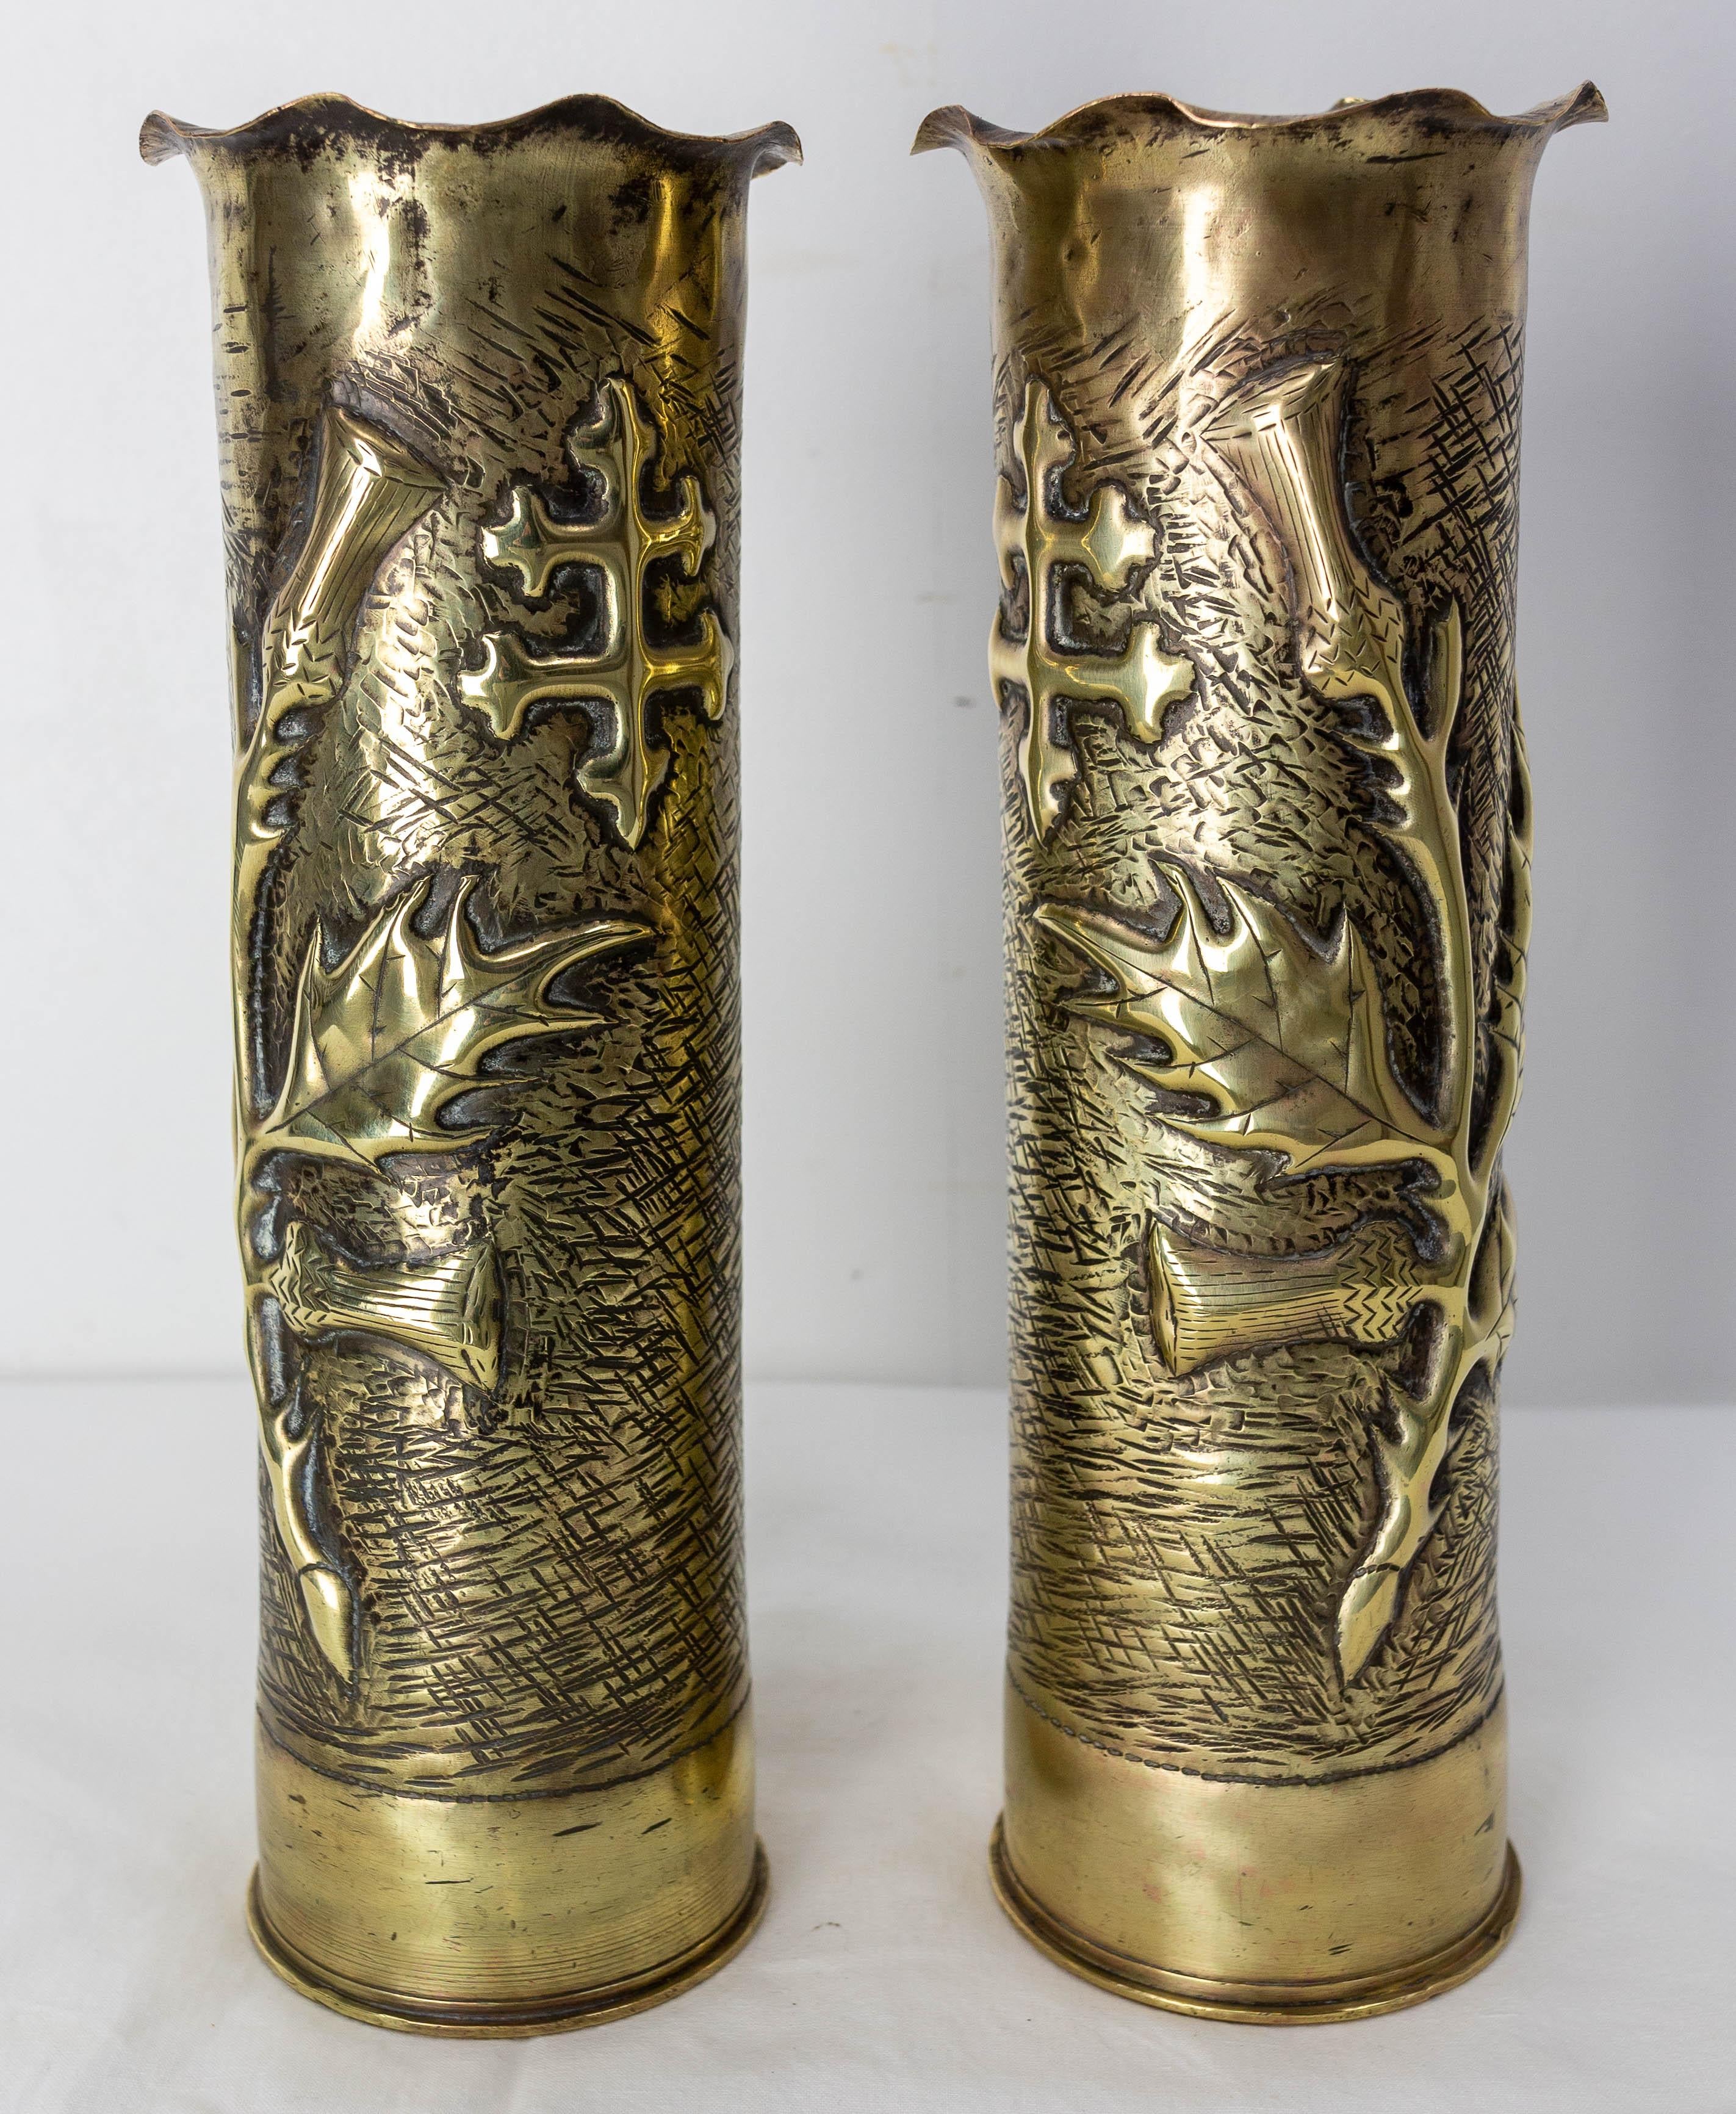 Antique French pair of shell casings from the World War I
Very typical of this war because the freedom of Alsace and Lorraine was one of the many issues at stake in this confrontation.
The thistle and the cross of Lorraine have been symbols of